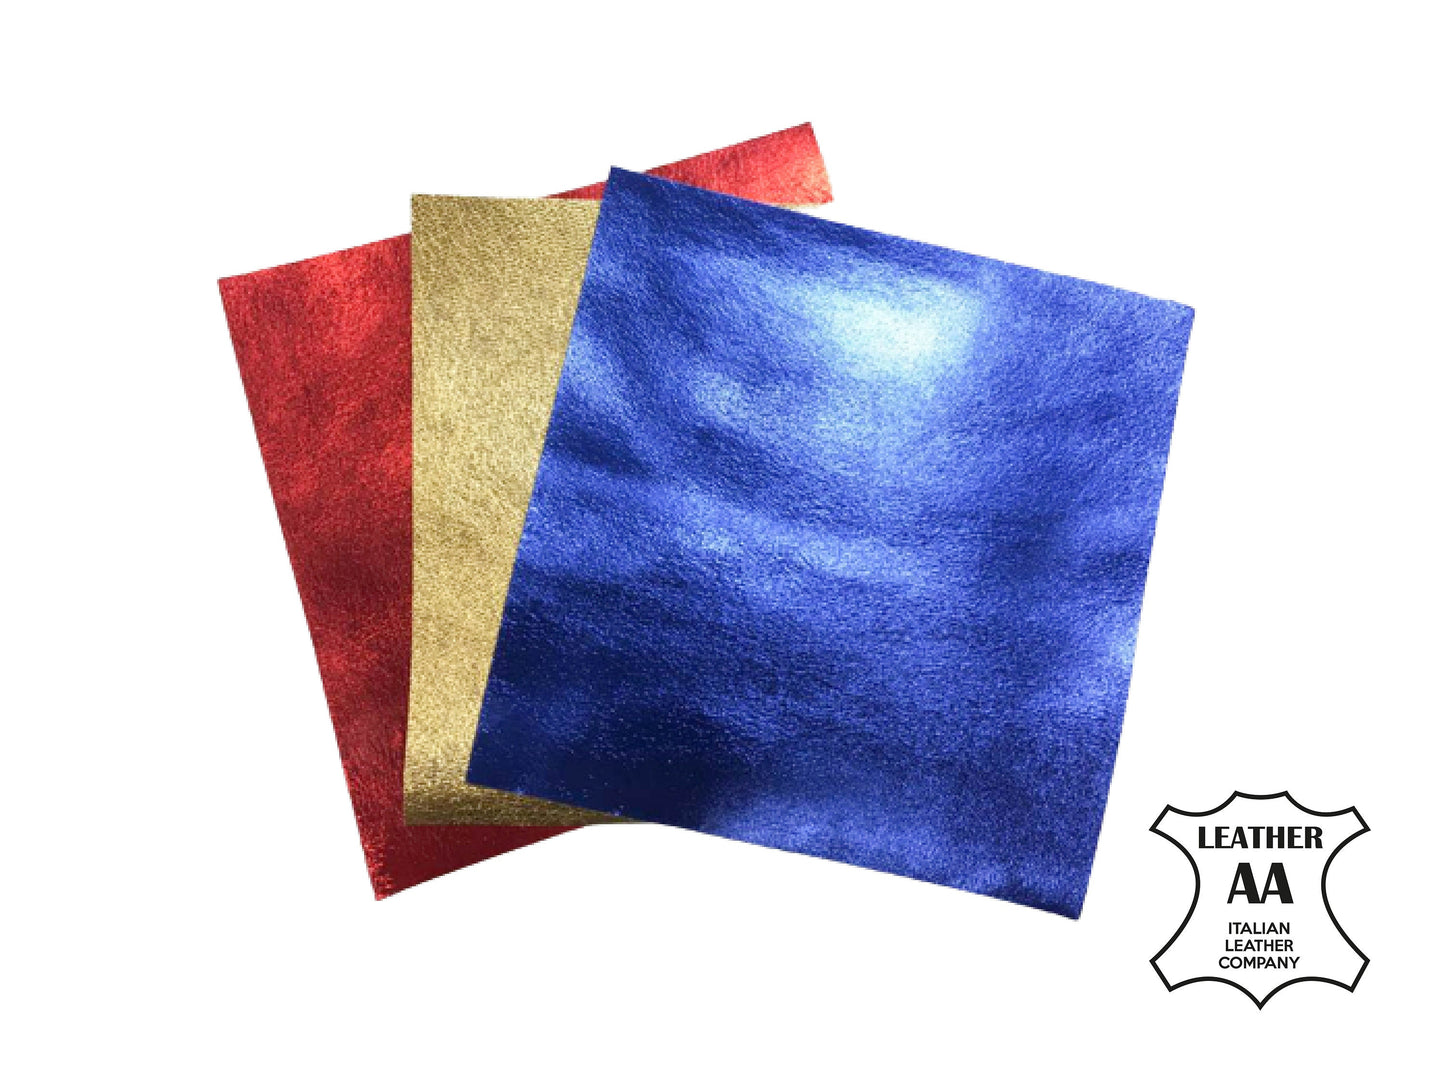 Three Metallic Leather Pieces 5x5in - Blue, Gold, Red Thin